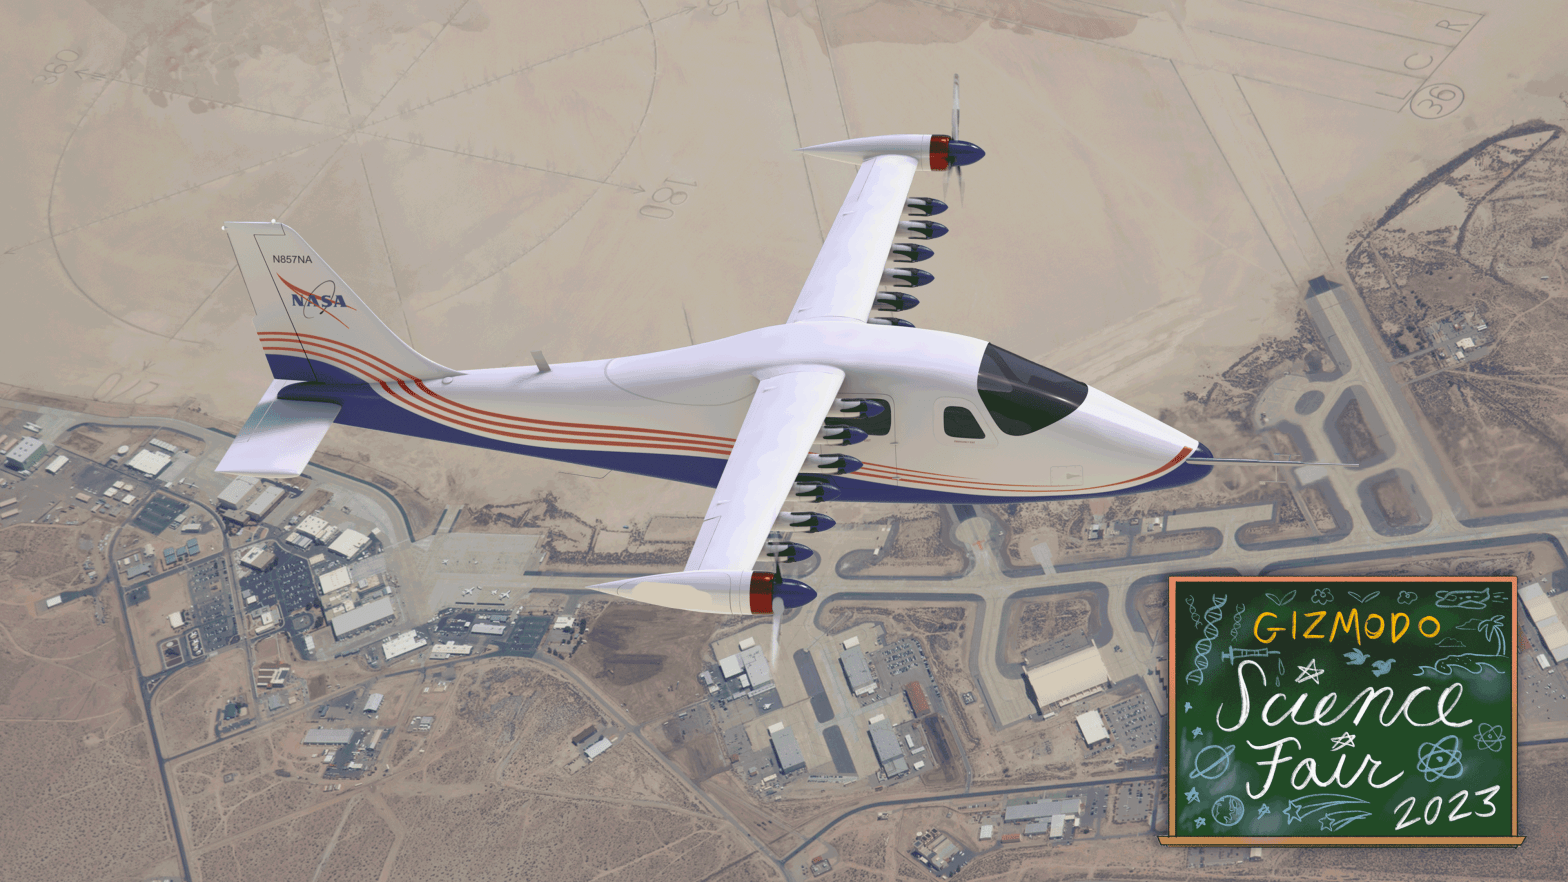 An artist's impression of the final form of the X-57 Maxwell in flight over California. (Image: Rendering: NASA Langley / Advanced Concepts Lab, AMA, Inc. Graphics: Vicky Leta)